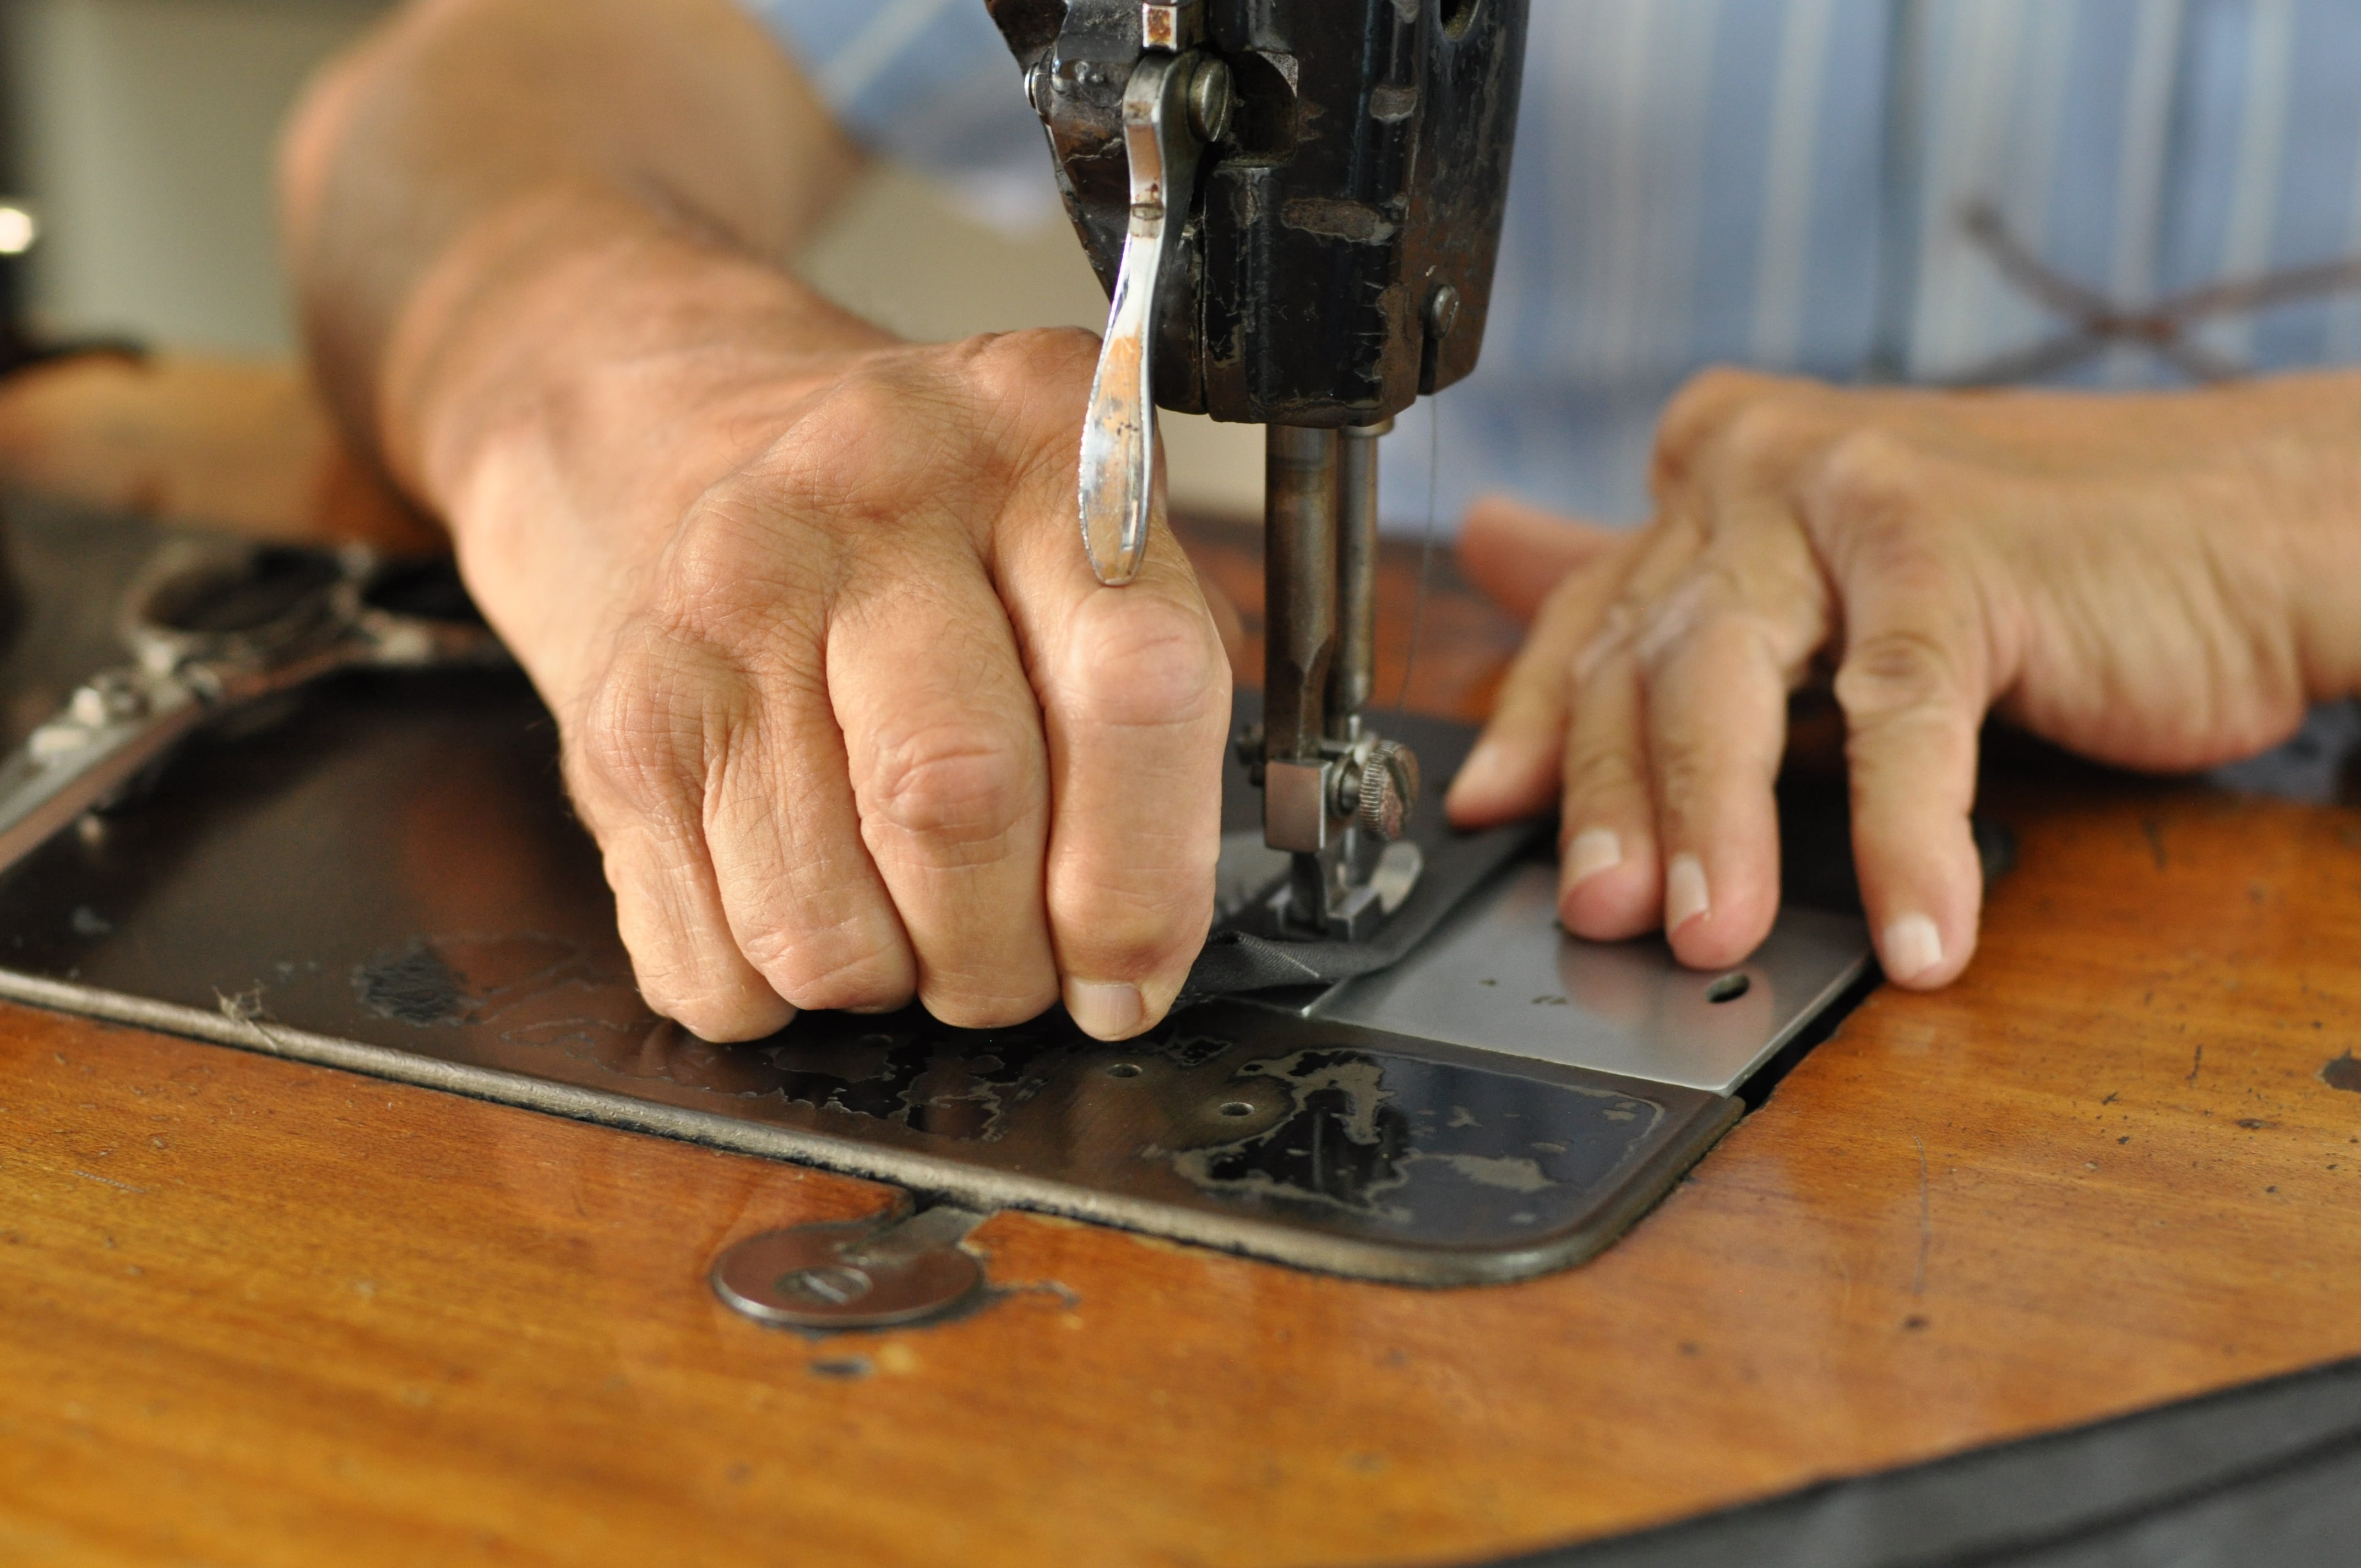 hands working at a sewing machine